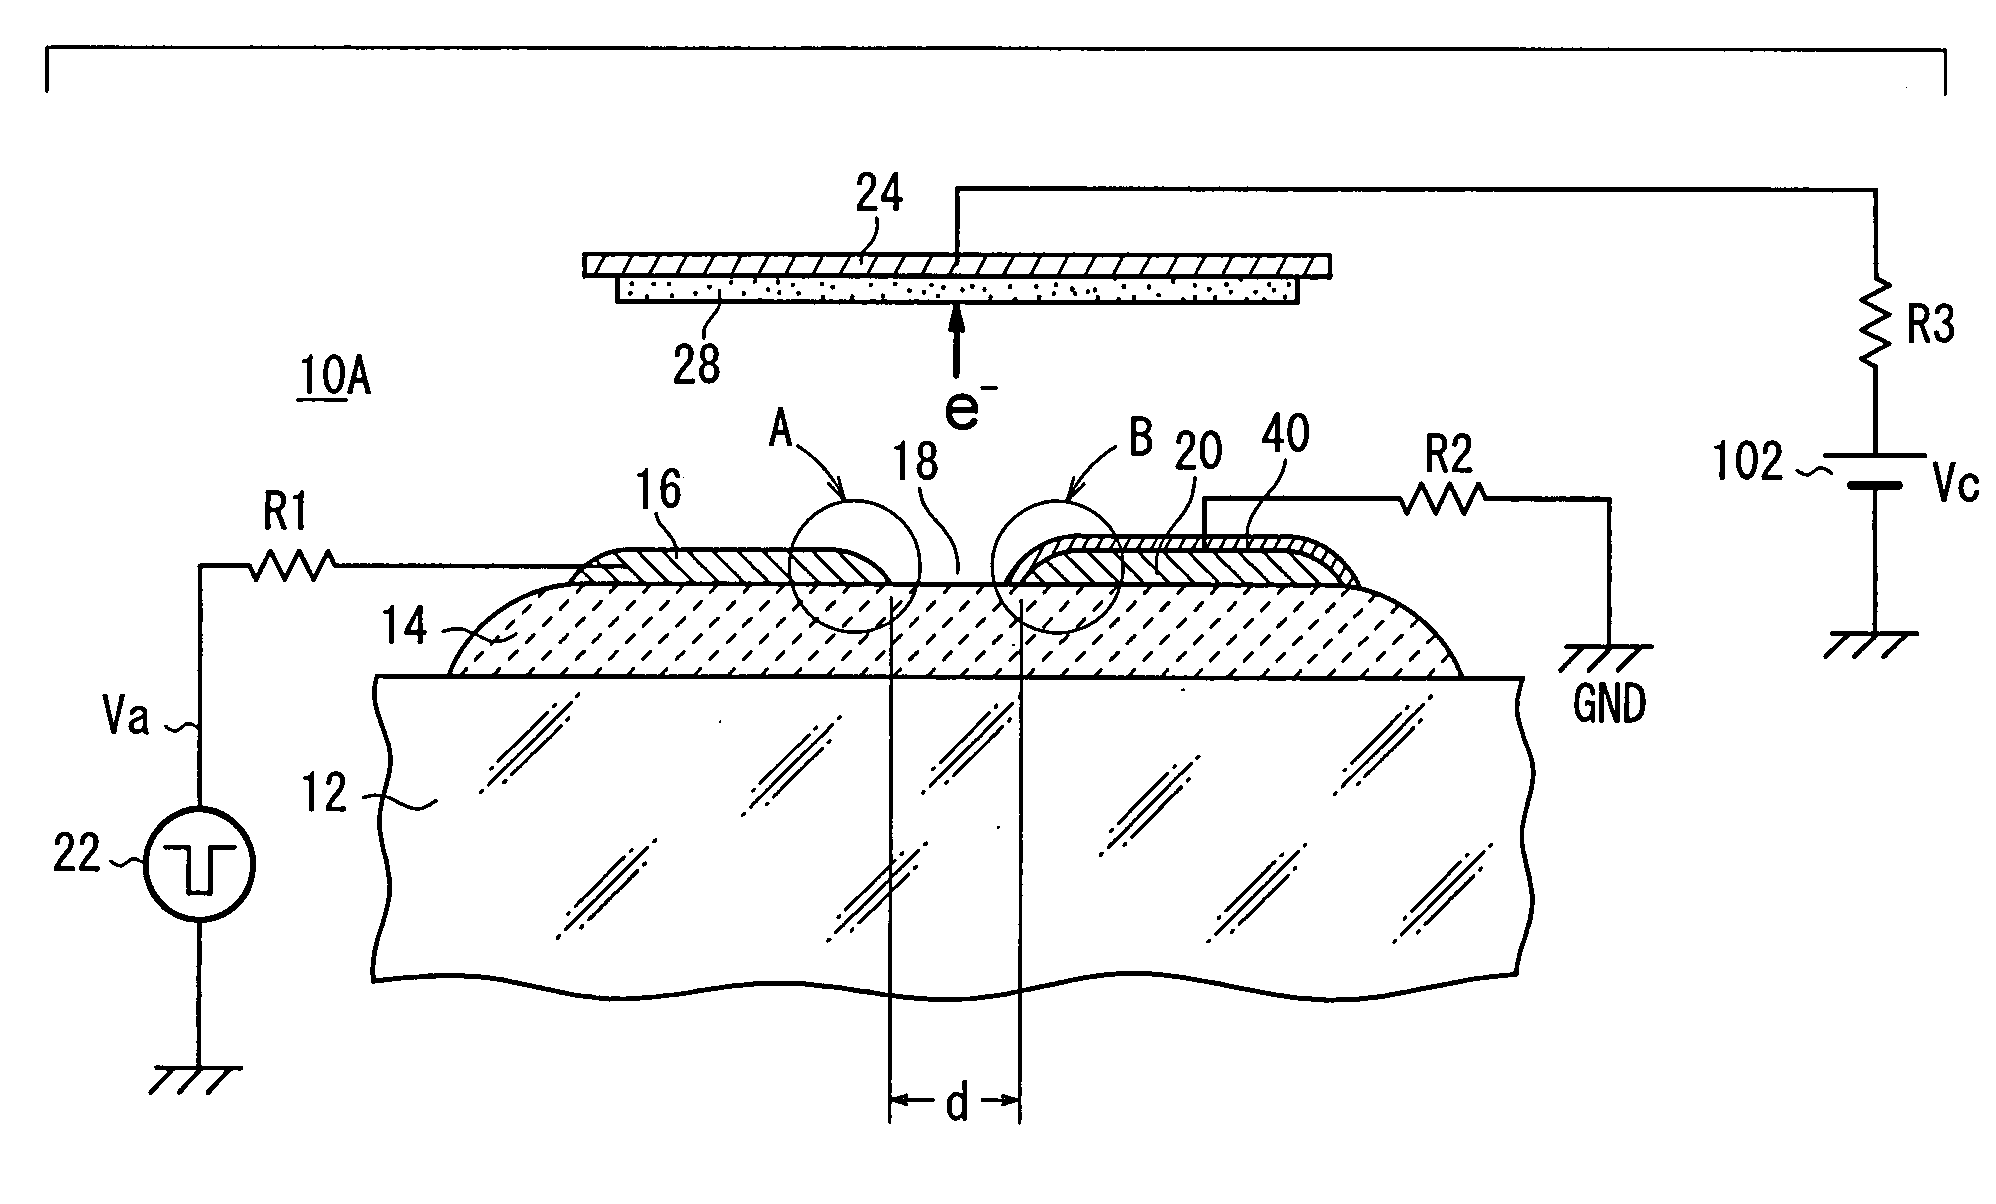 Electron emitter comprising emitter section made of dielectric material